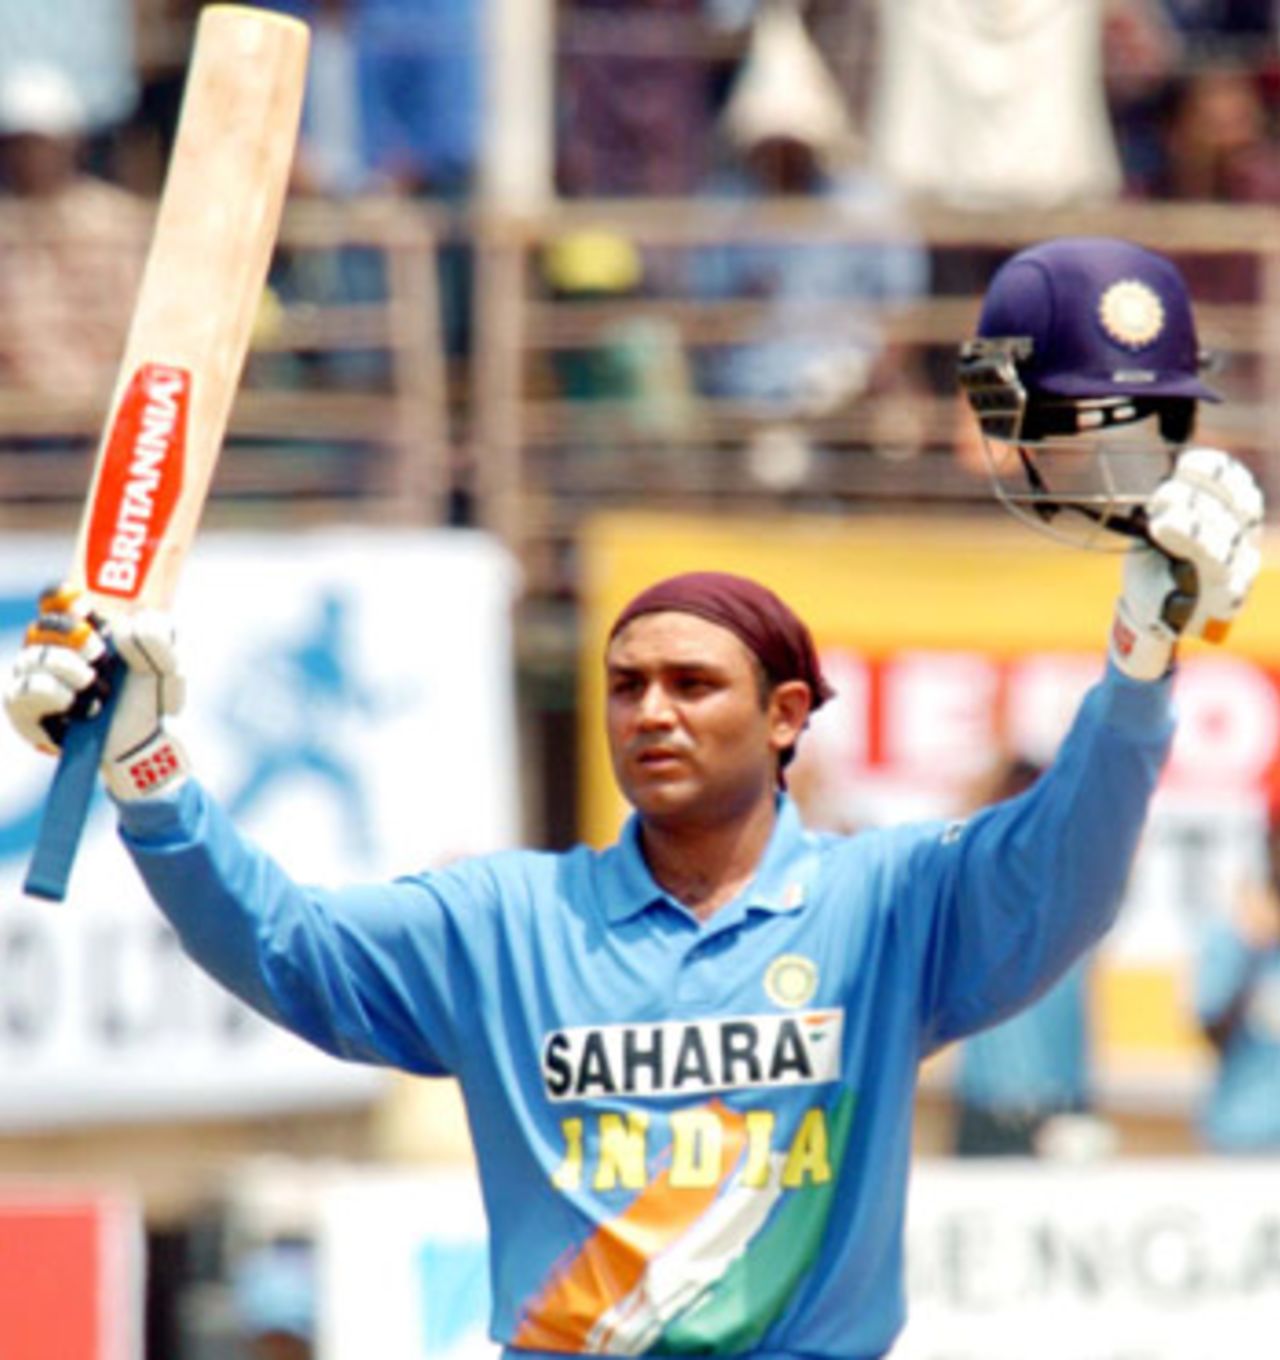 It was left to that man again - Virender Sehwag - who was brilliant in the test series, who carted a 95-ball 108 - his 7th ODI hundred.